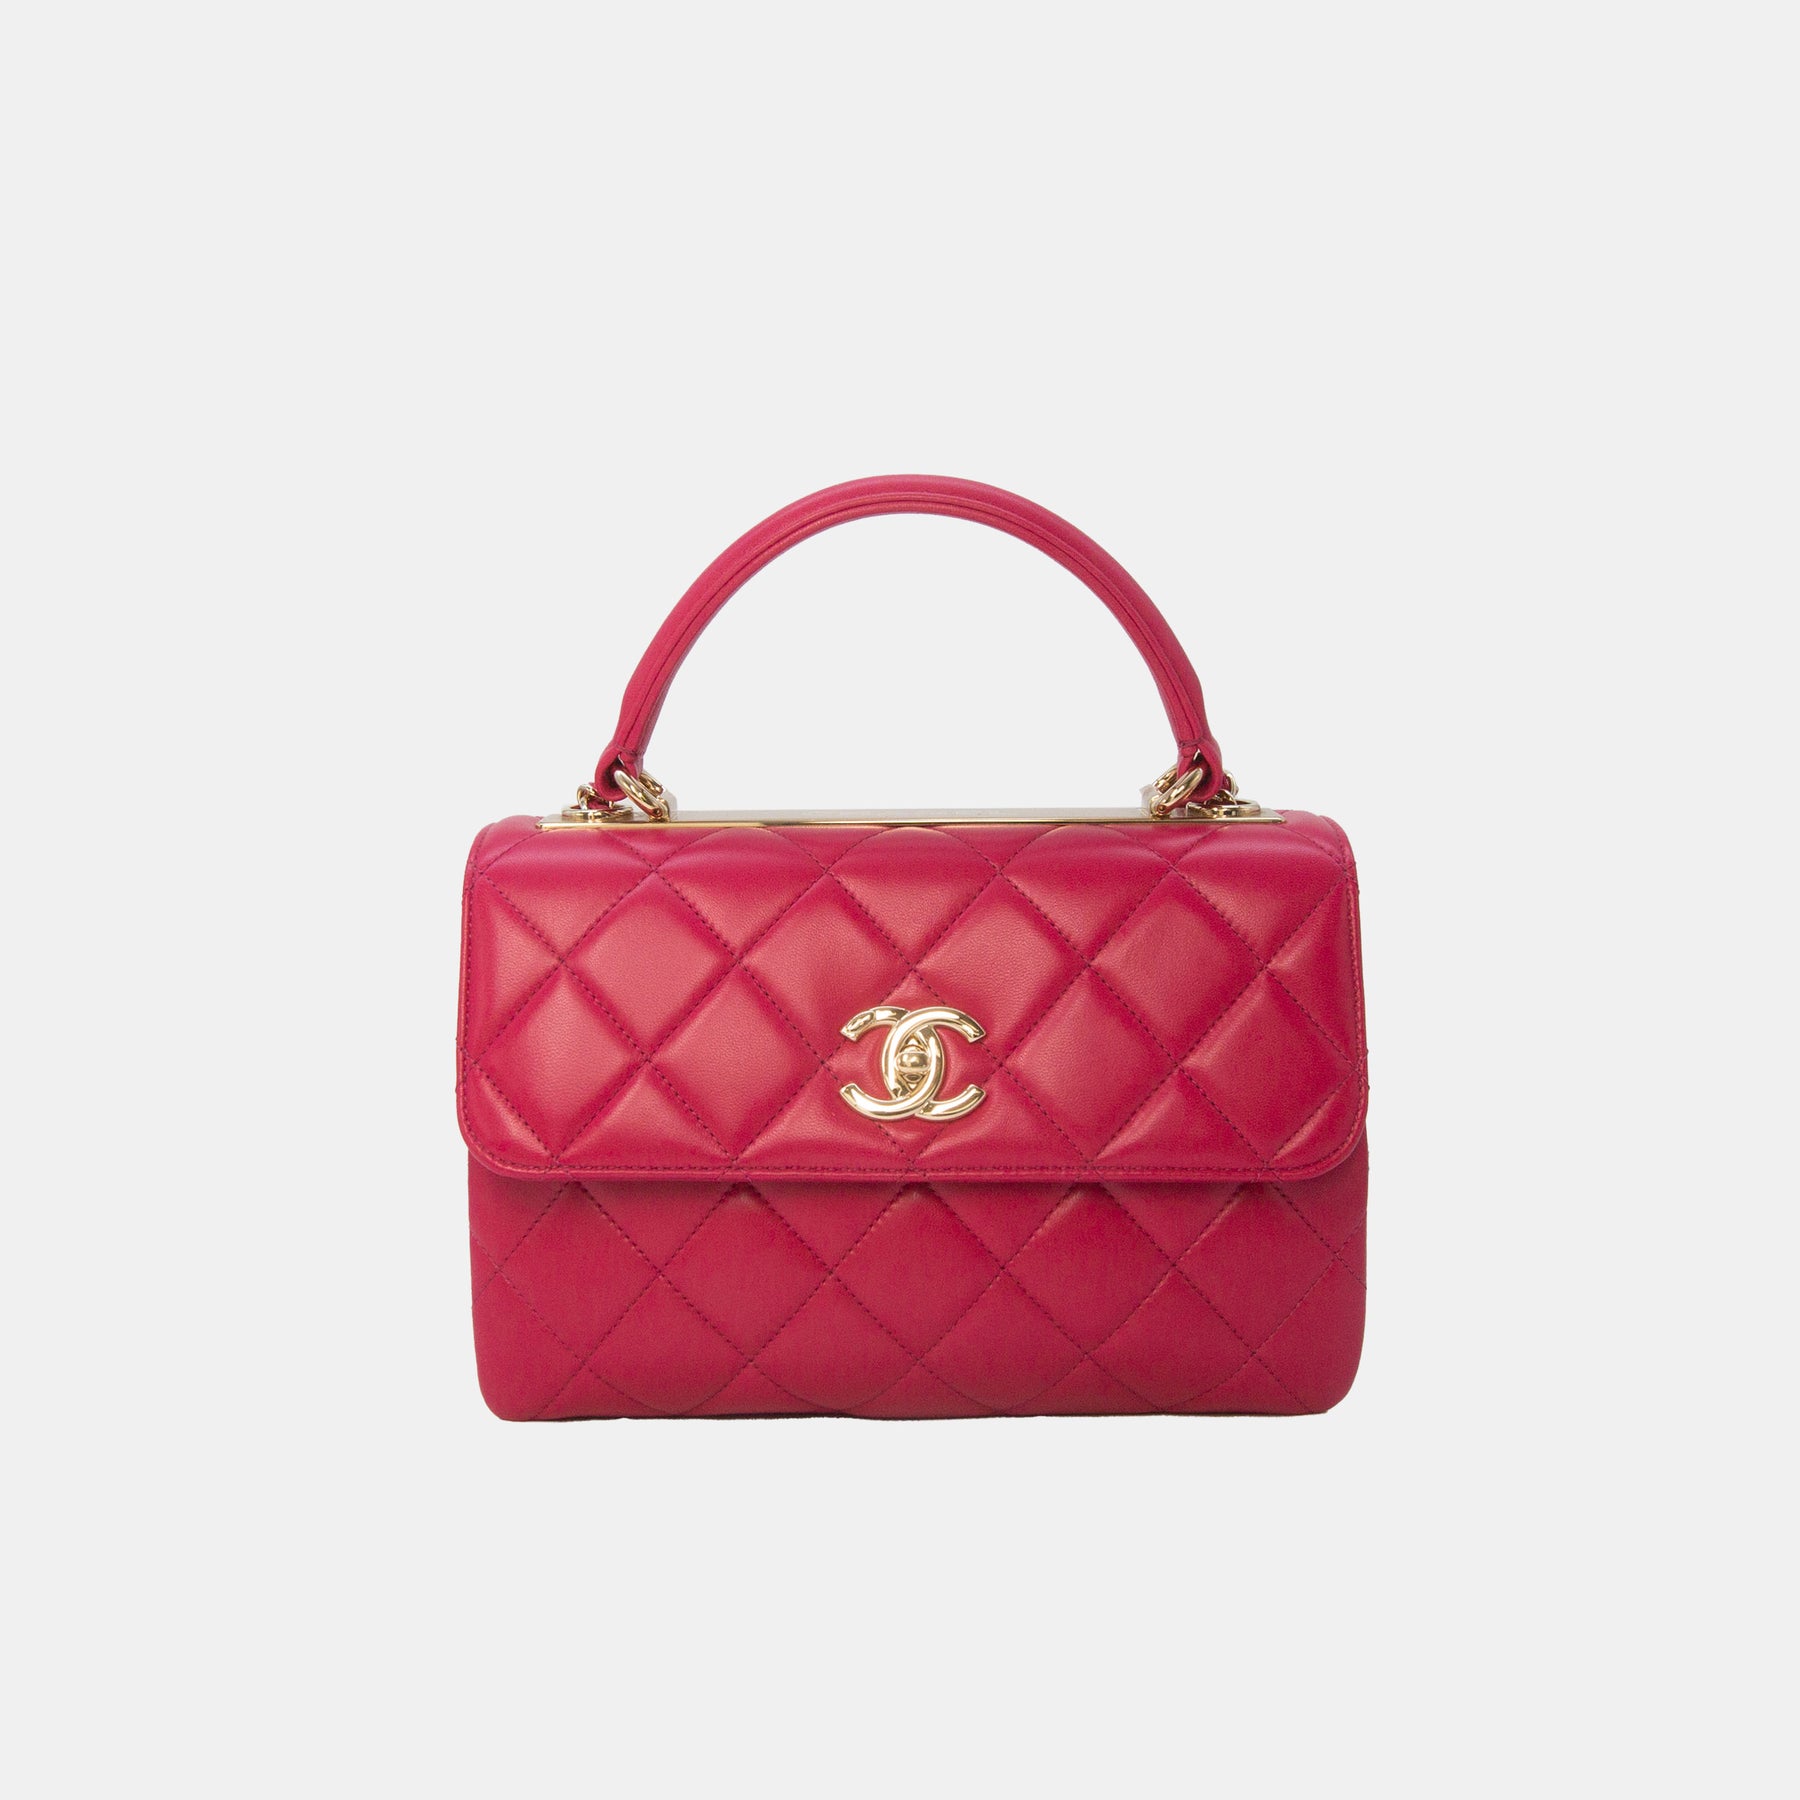 CHANEL Lambskin Quilted Small Trendy CC Flap Dual Handle Bag Pink 659226